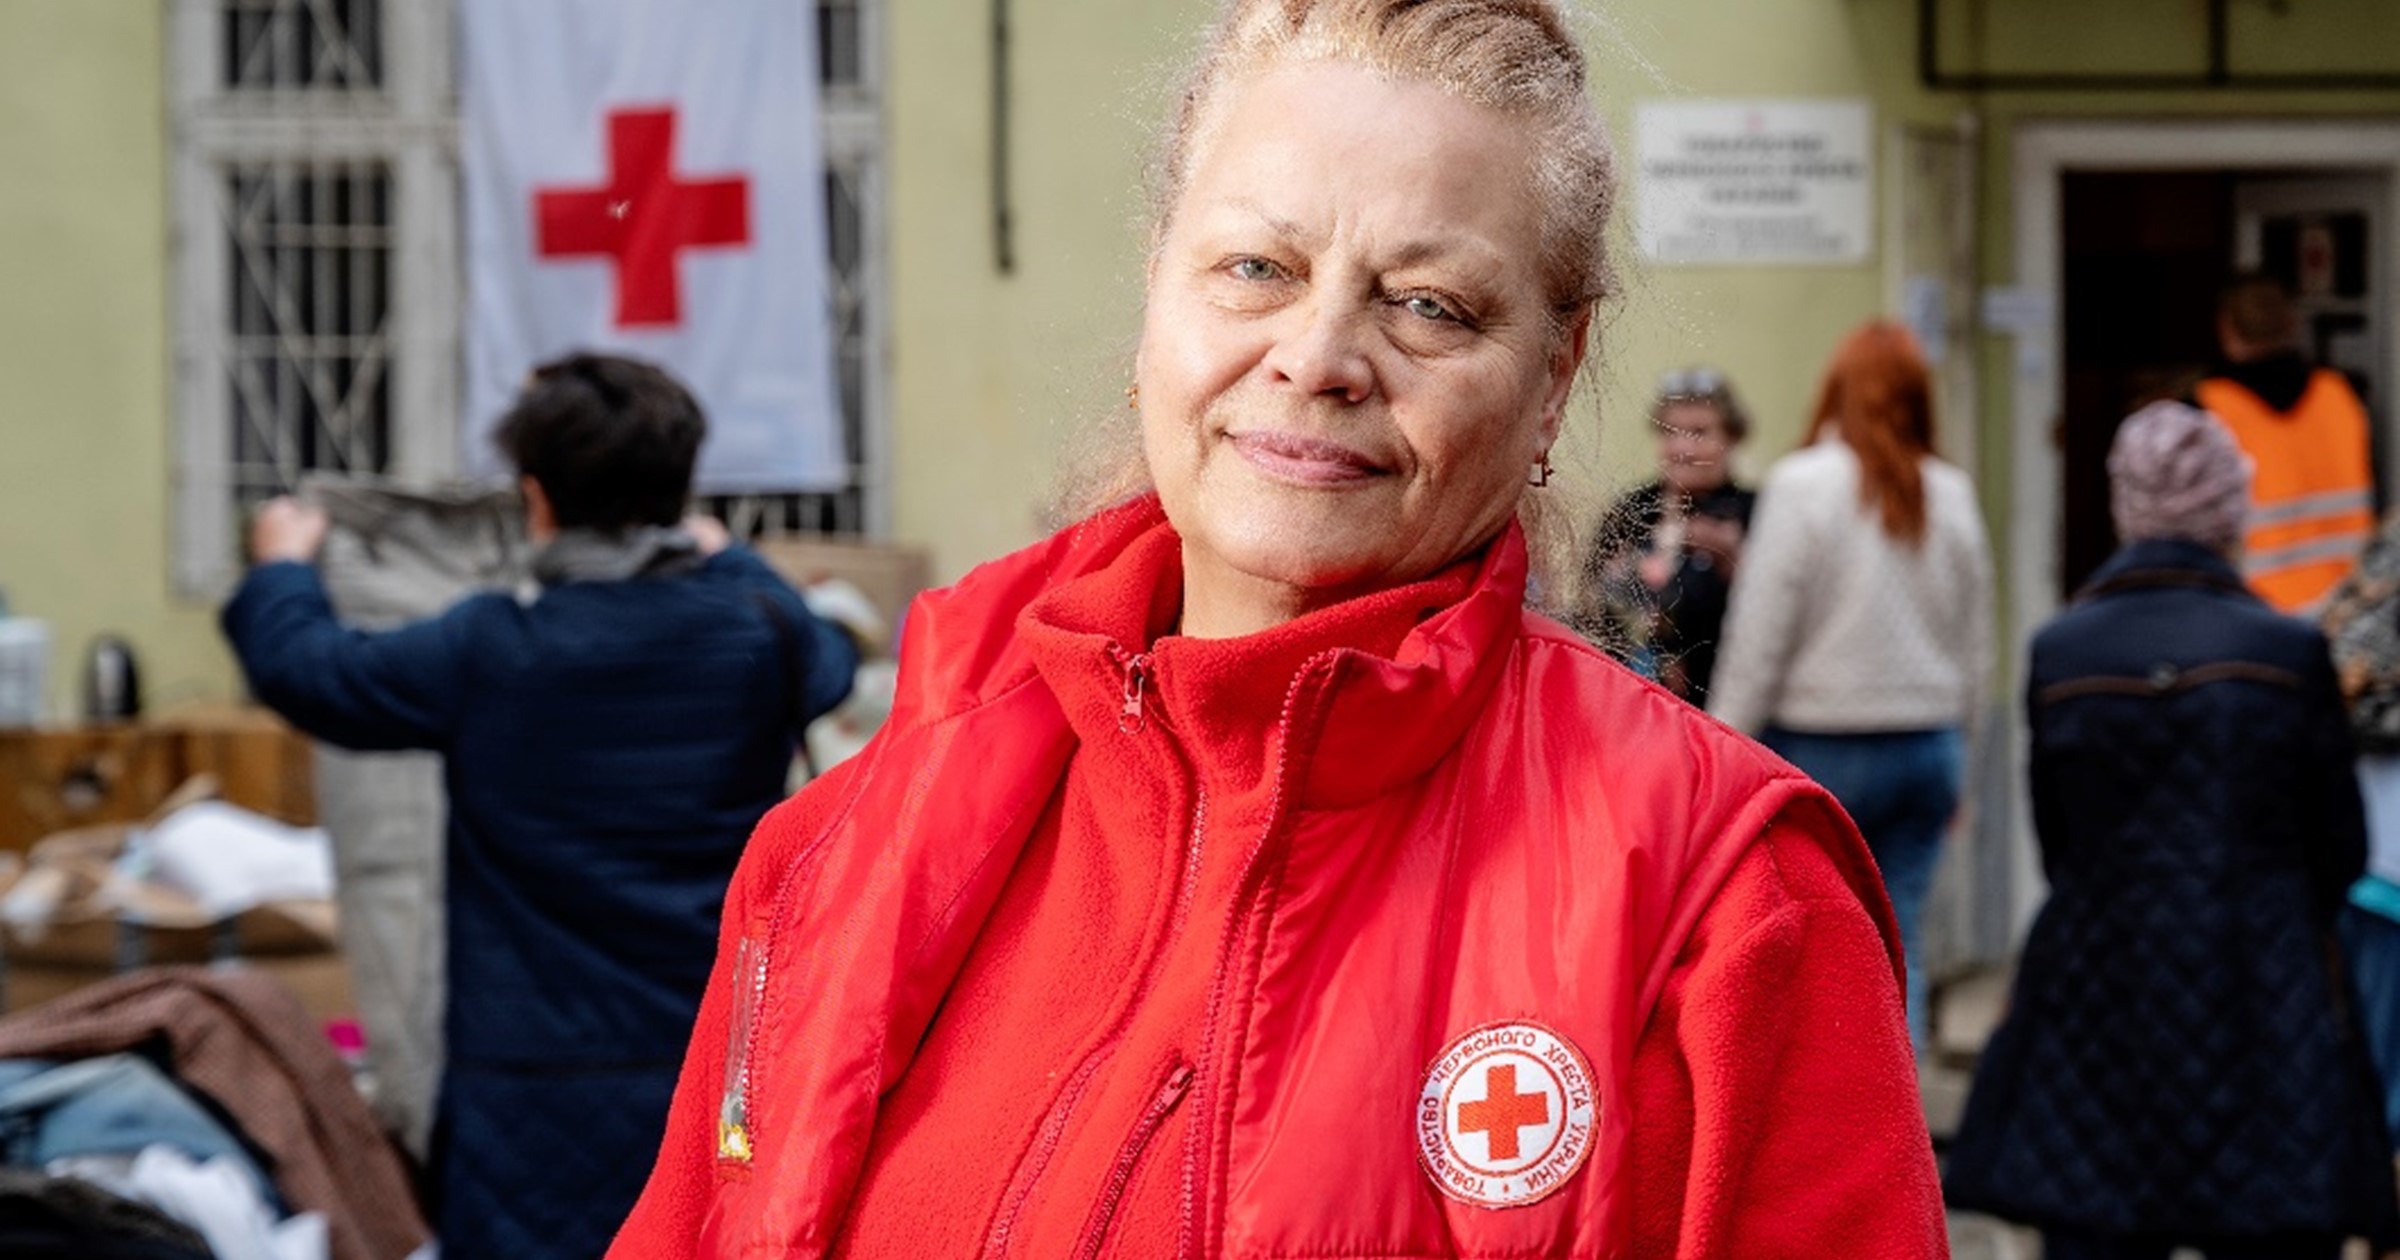 One Year Humanitarian Crisis in Ukraine: The Supporting Role of Technology